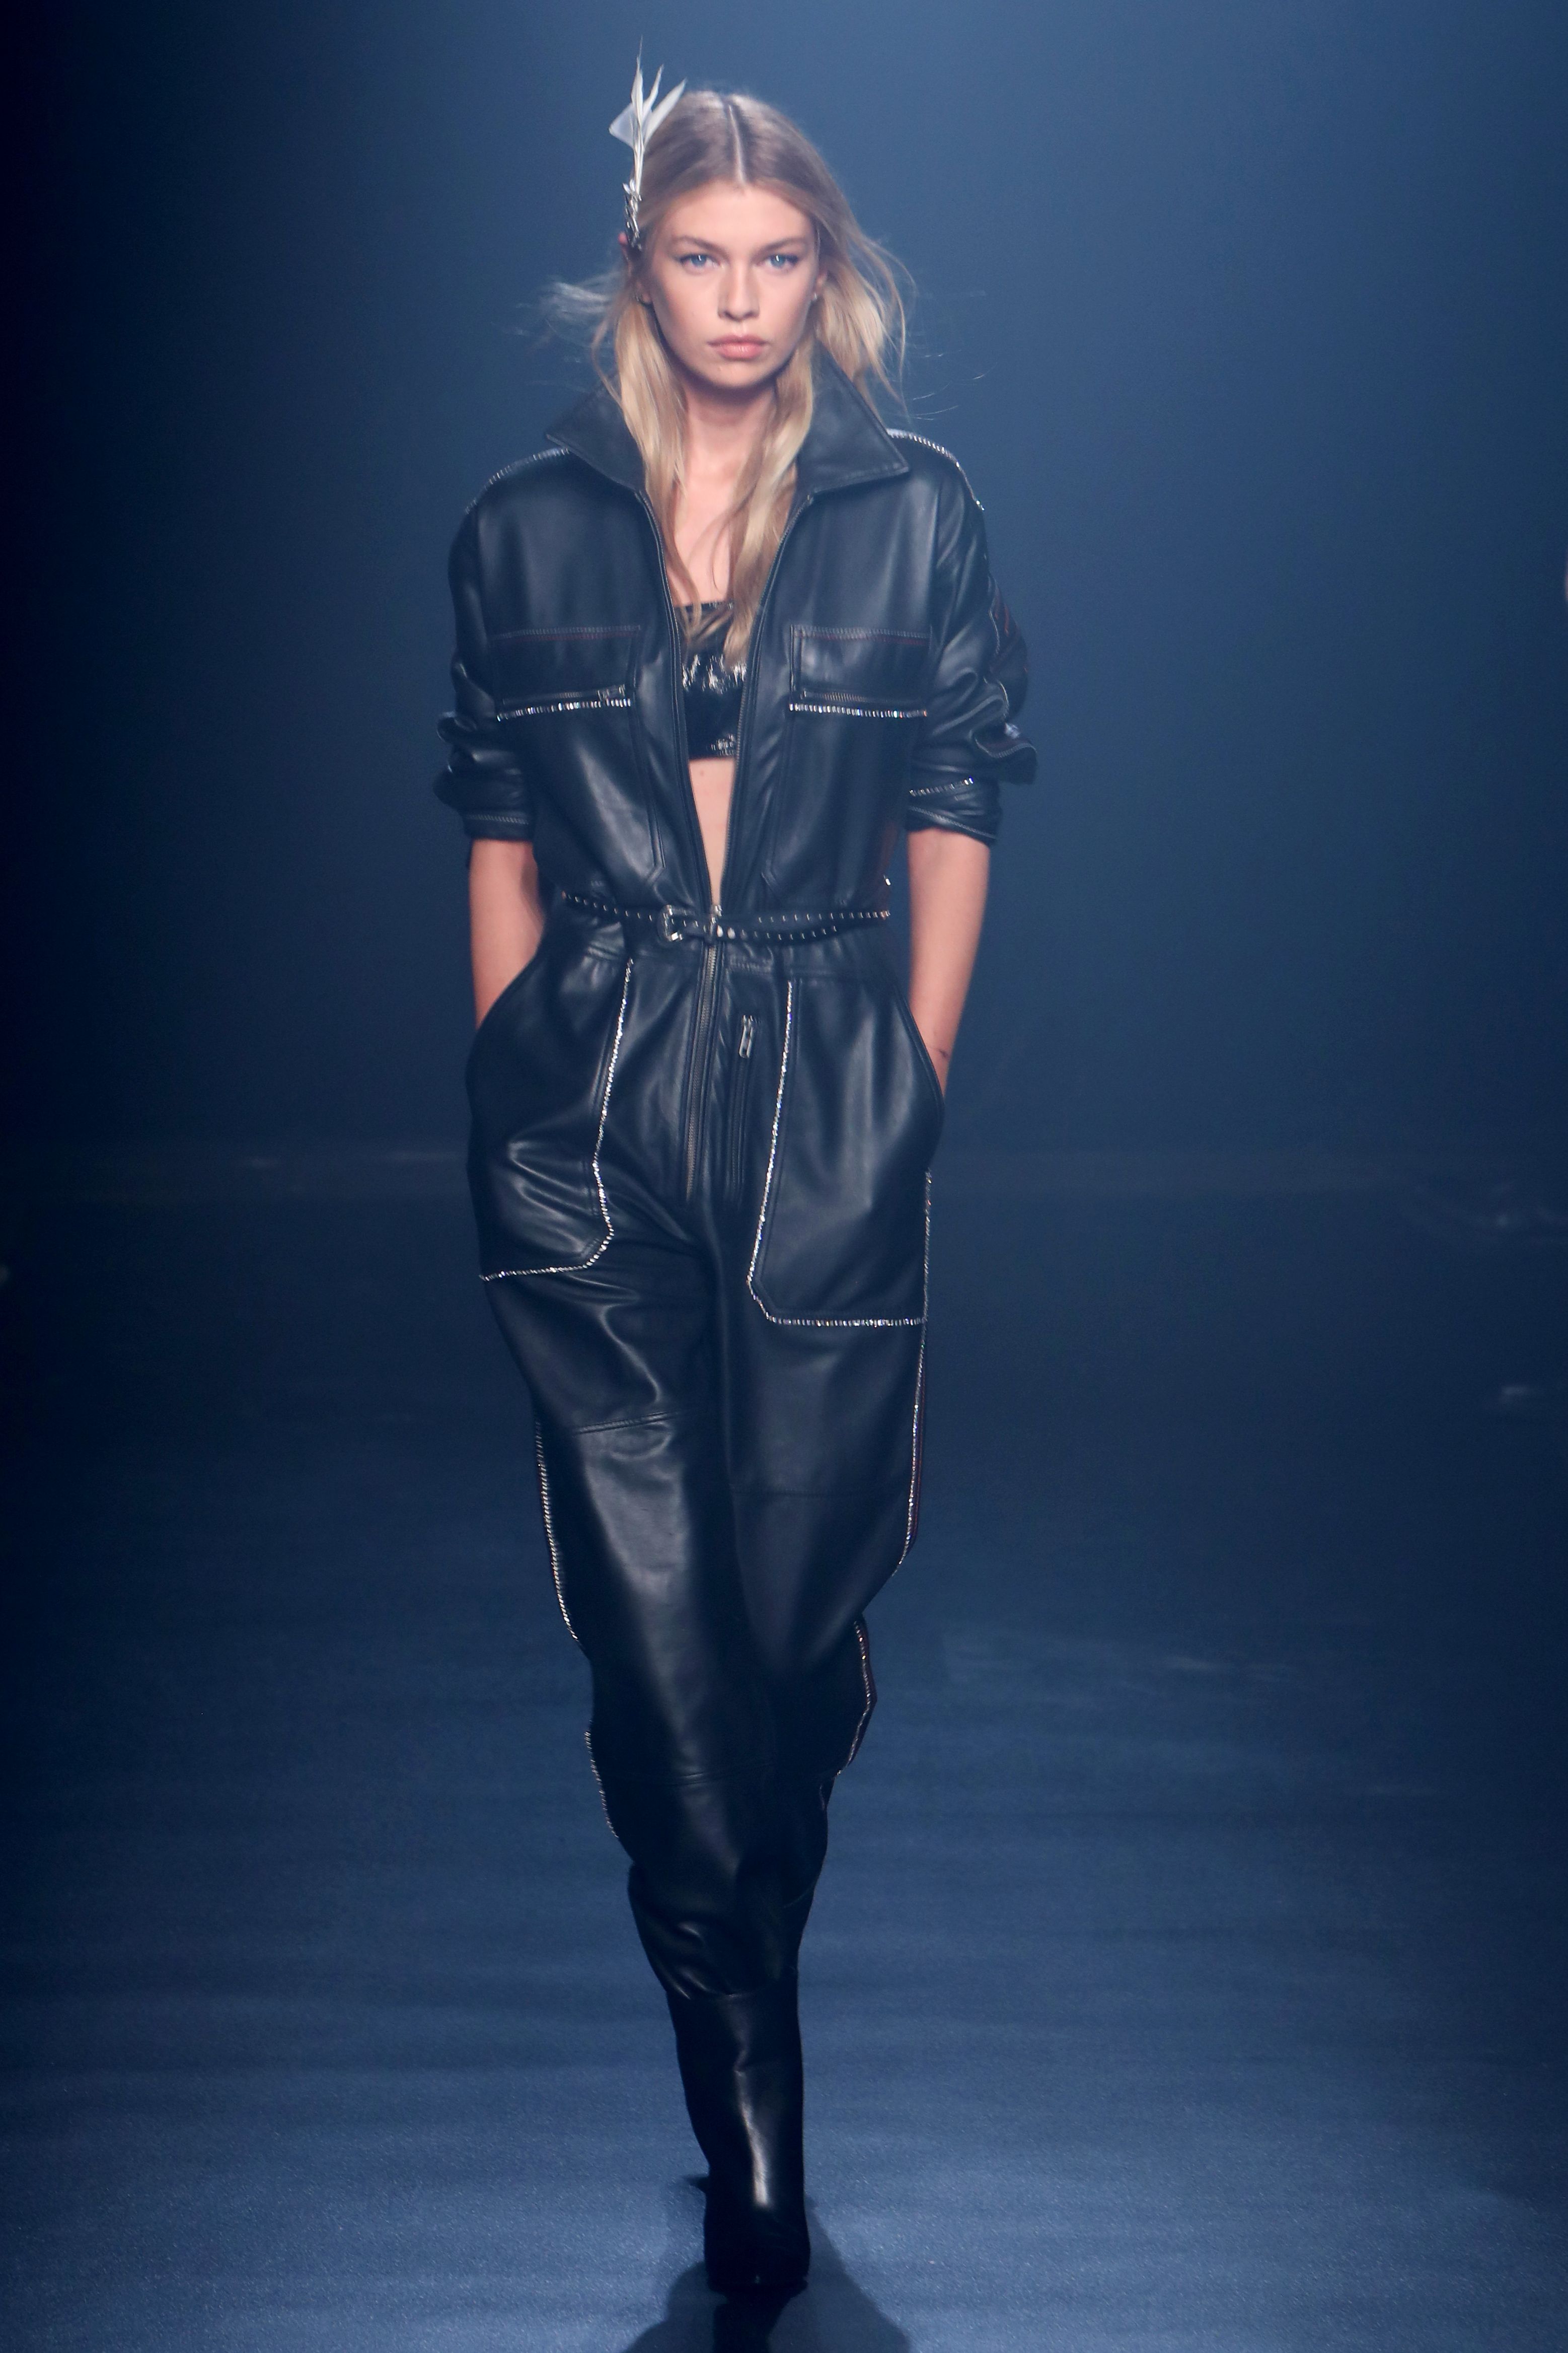 Stella Maxwell attends Walks in the Zadig & Voltaire show